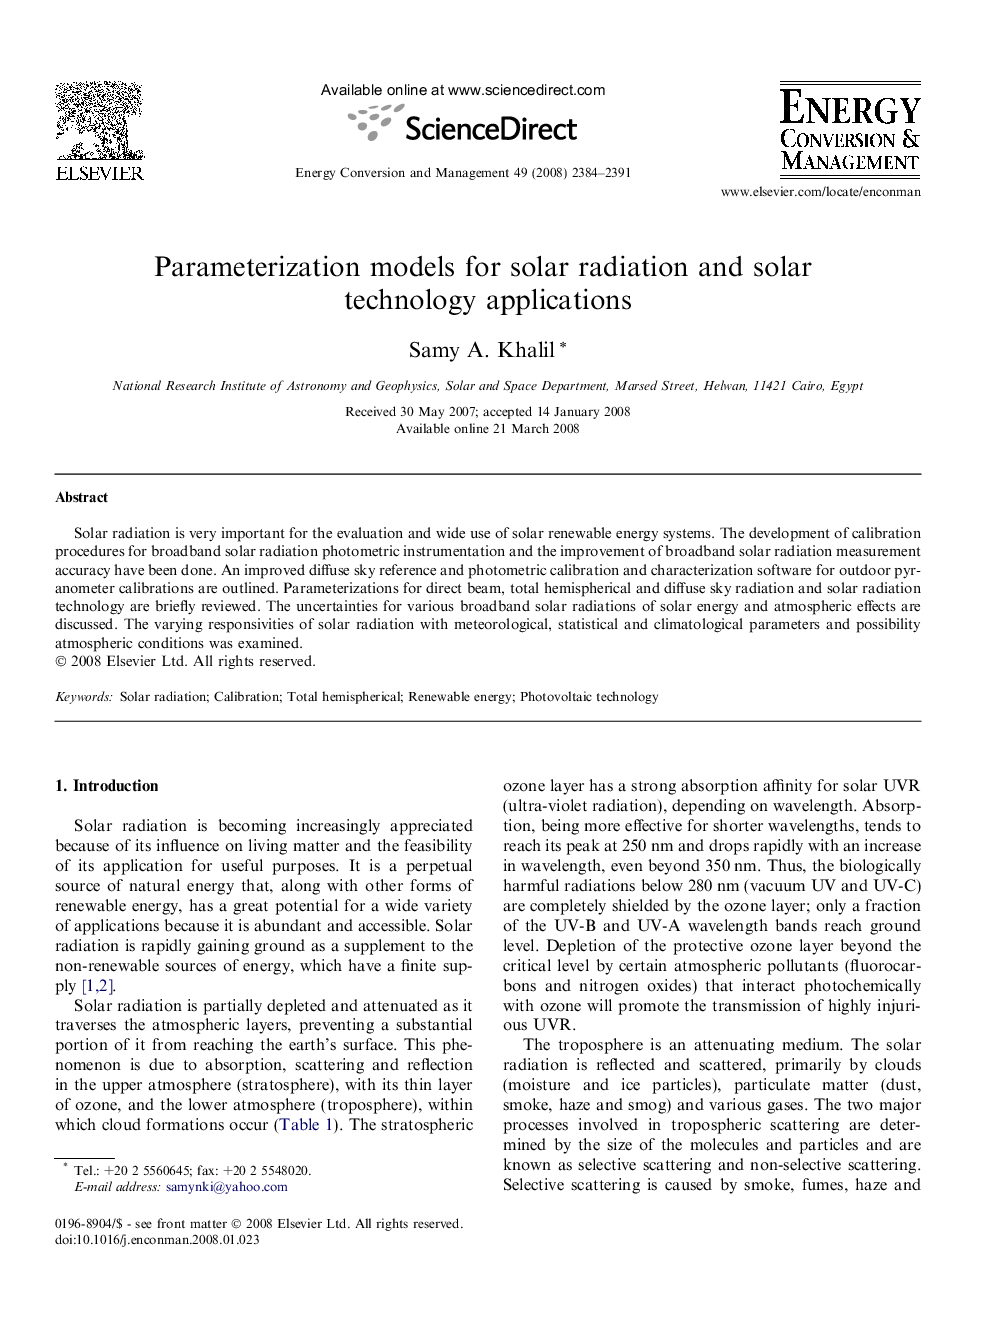 Parameterization models for solar radiation and solar technology applications